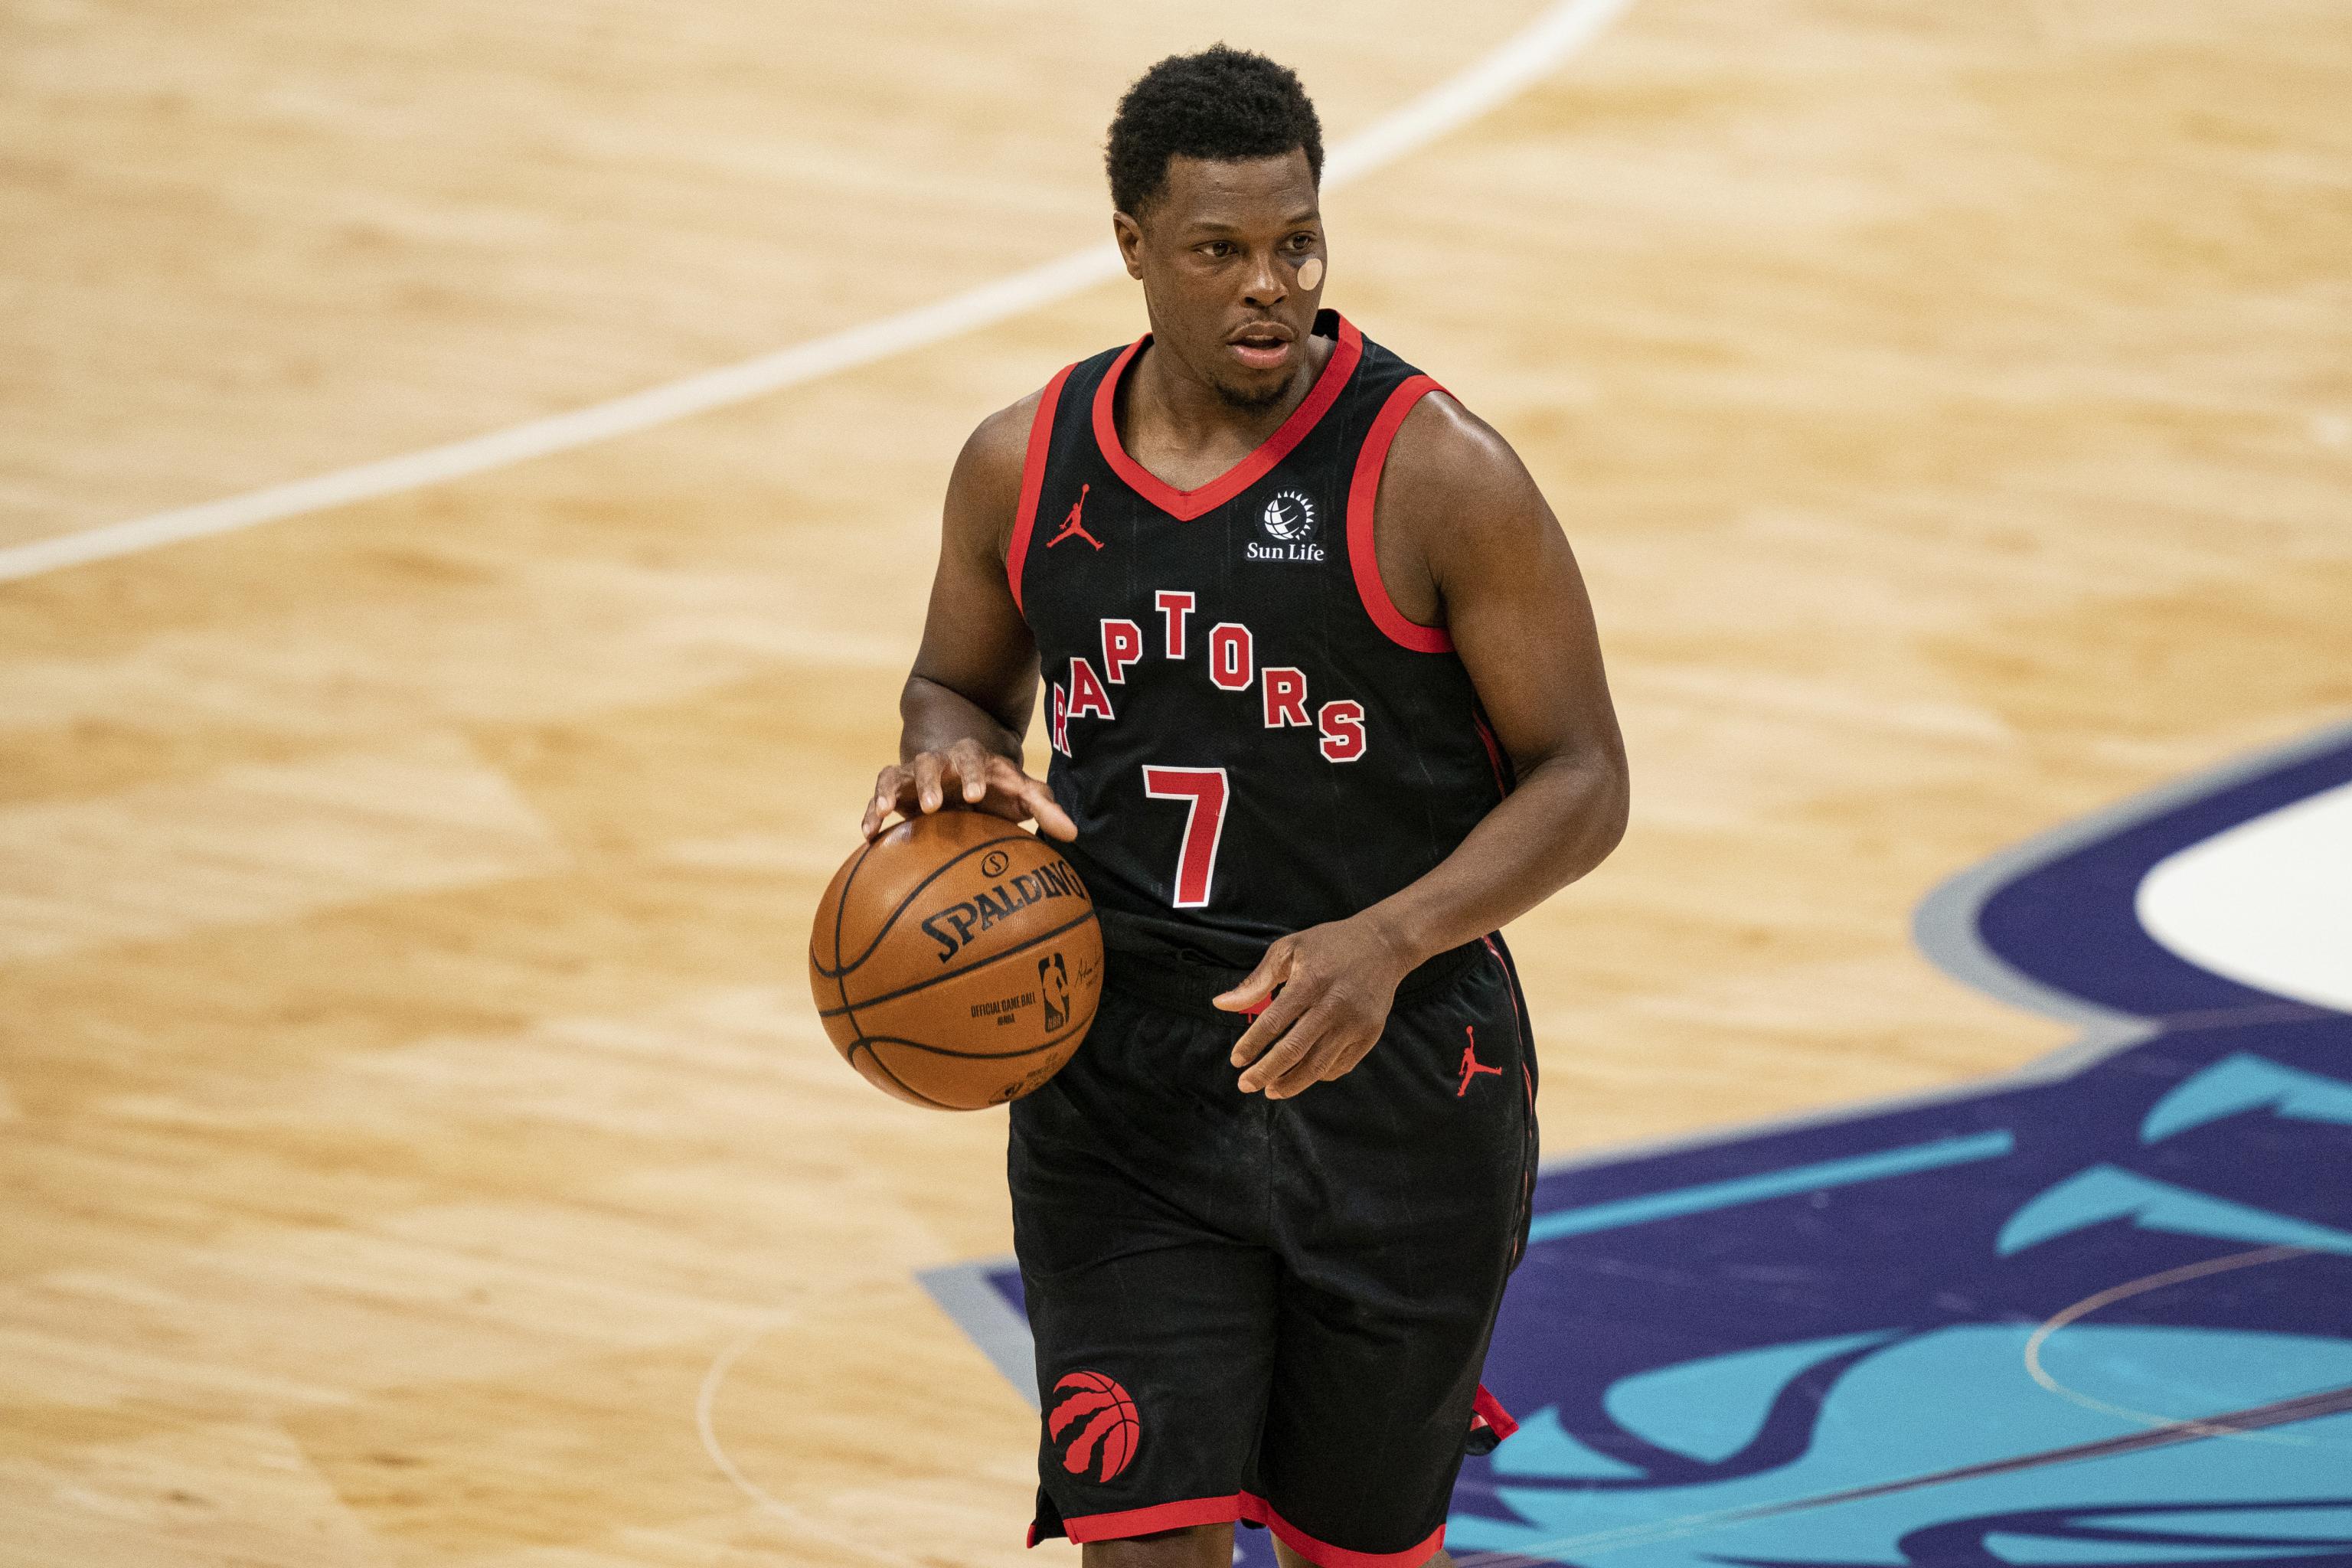 NBA playoffs 2019: Raptors' Kyle Lowry gets into it with Sixers fan (VIDEO)  